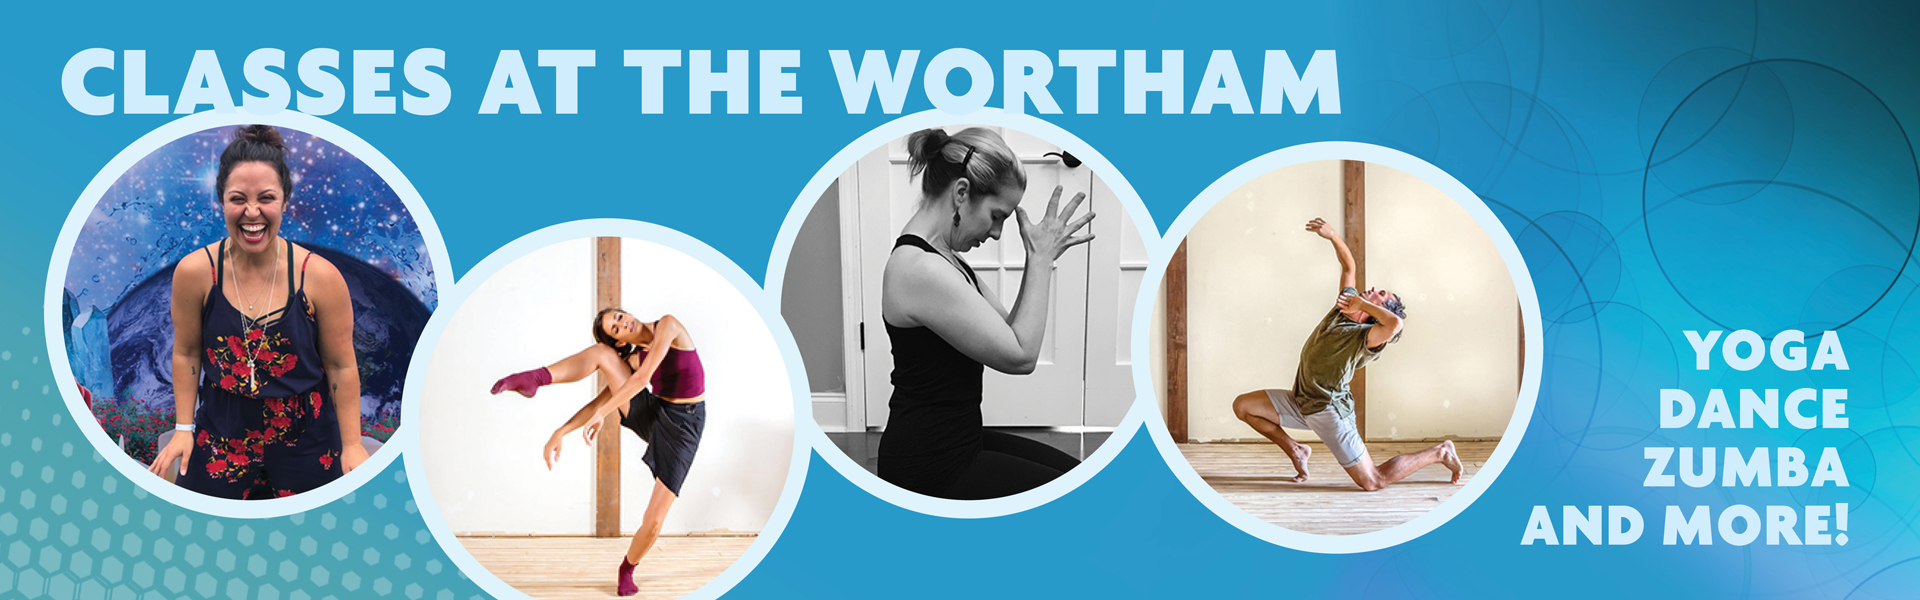 Classes at the Wortham: Yoga, Dance, Zumba and More!